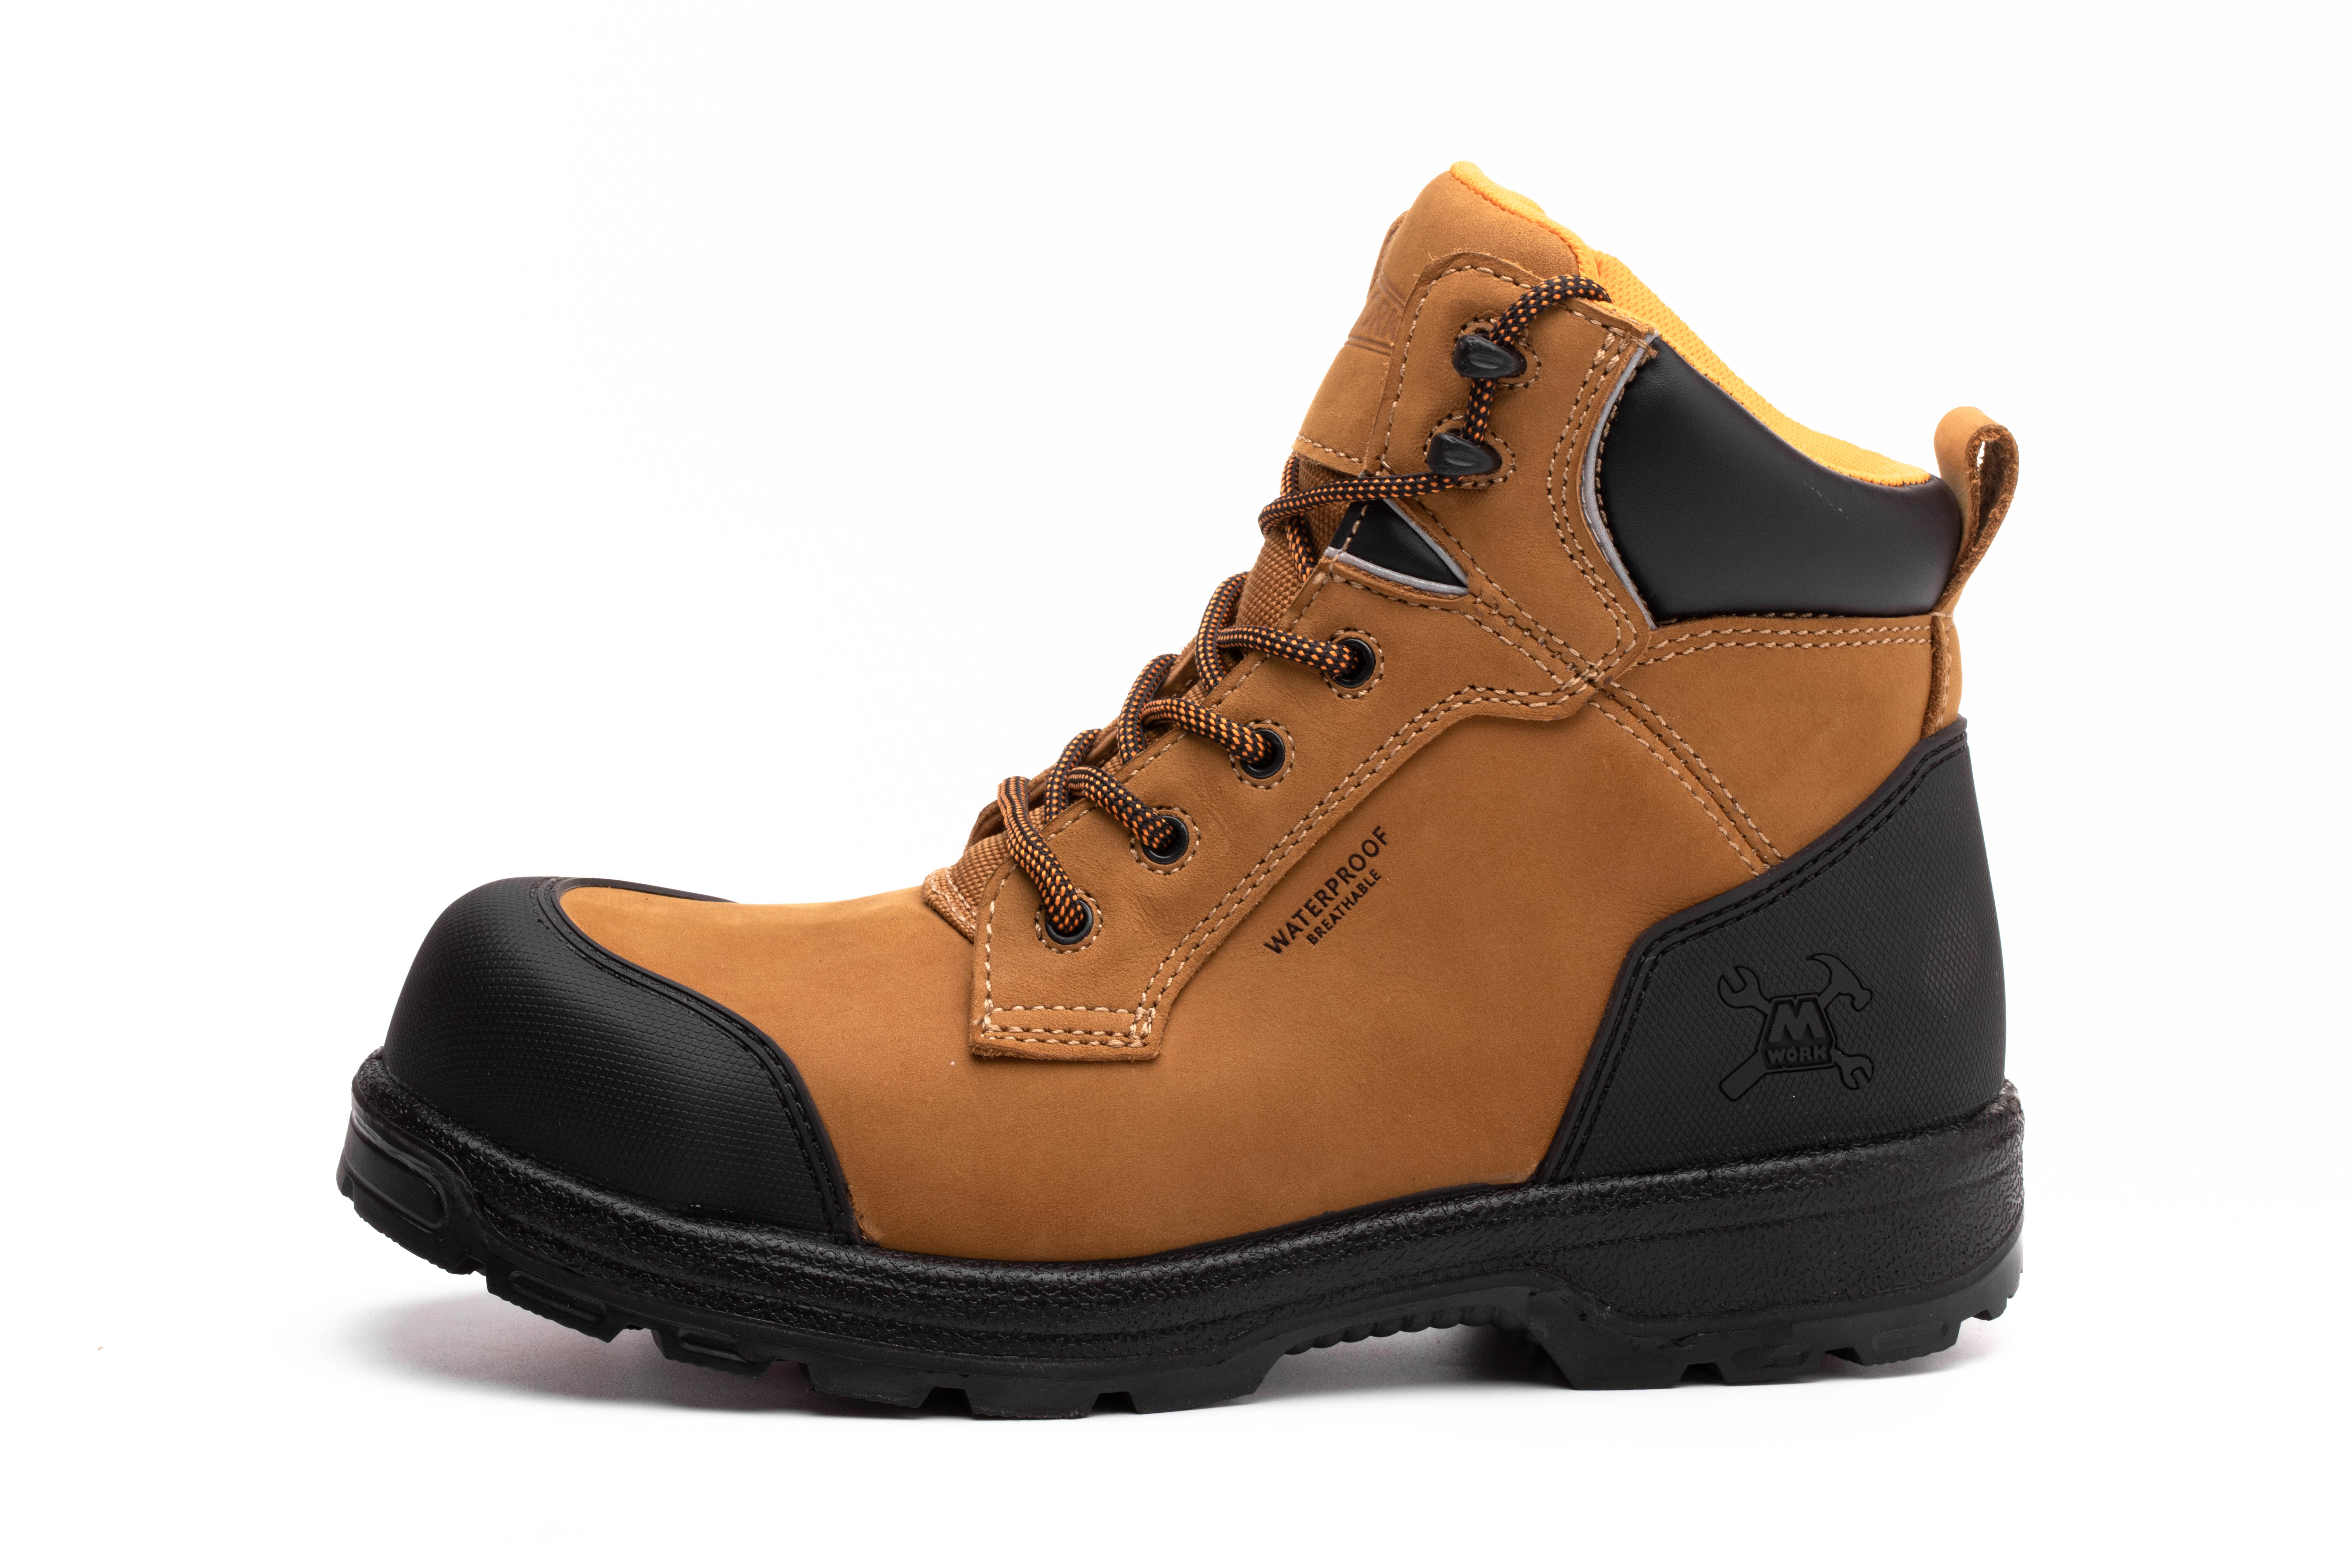 Top-Rated Safety Work Shoes: Ensuring Enhanced Workplace Safety